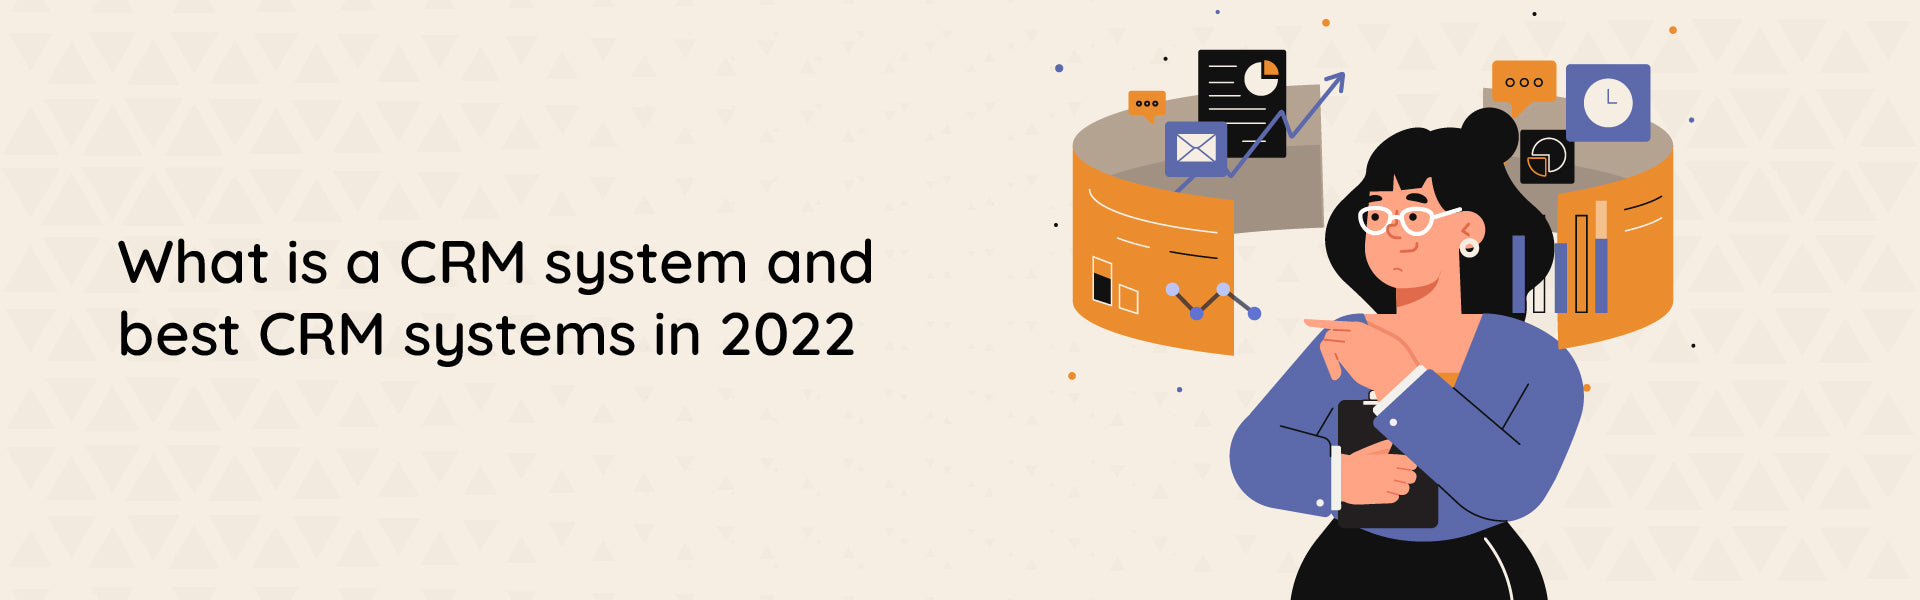 What is a CRM system and the best CRM systems in 2022.